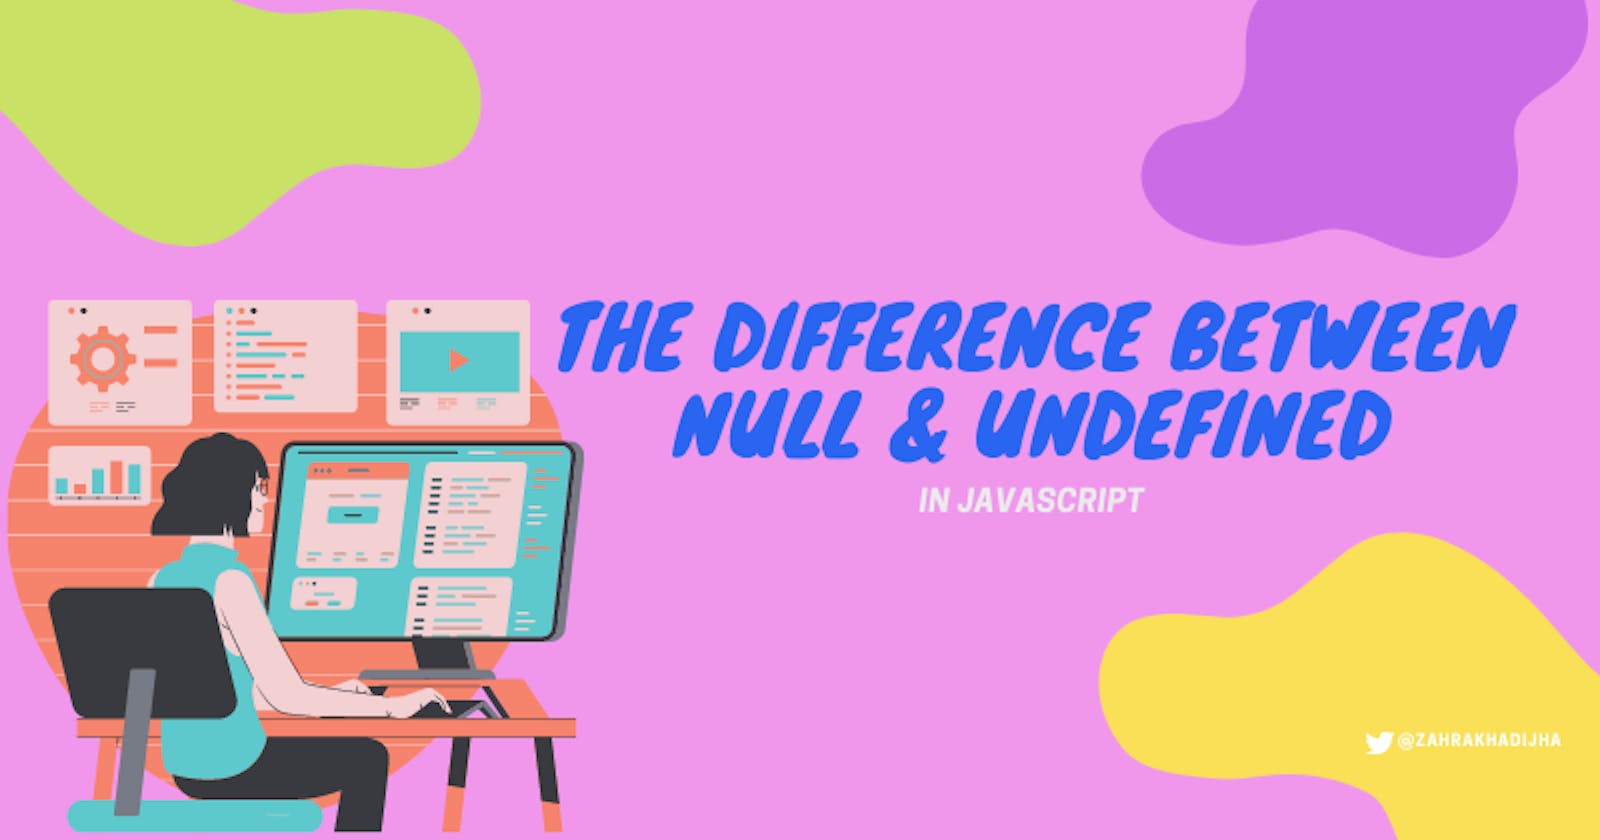 The Difference Between Null and Undefined in JavaScript